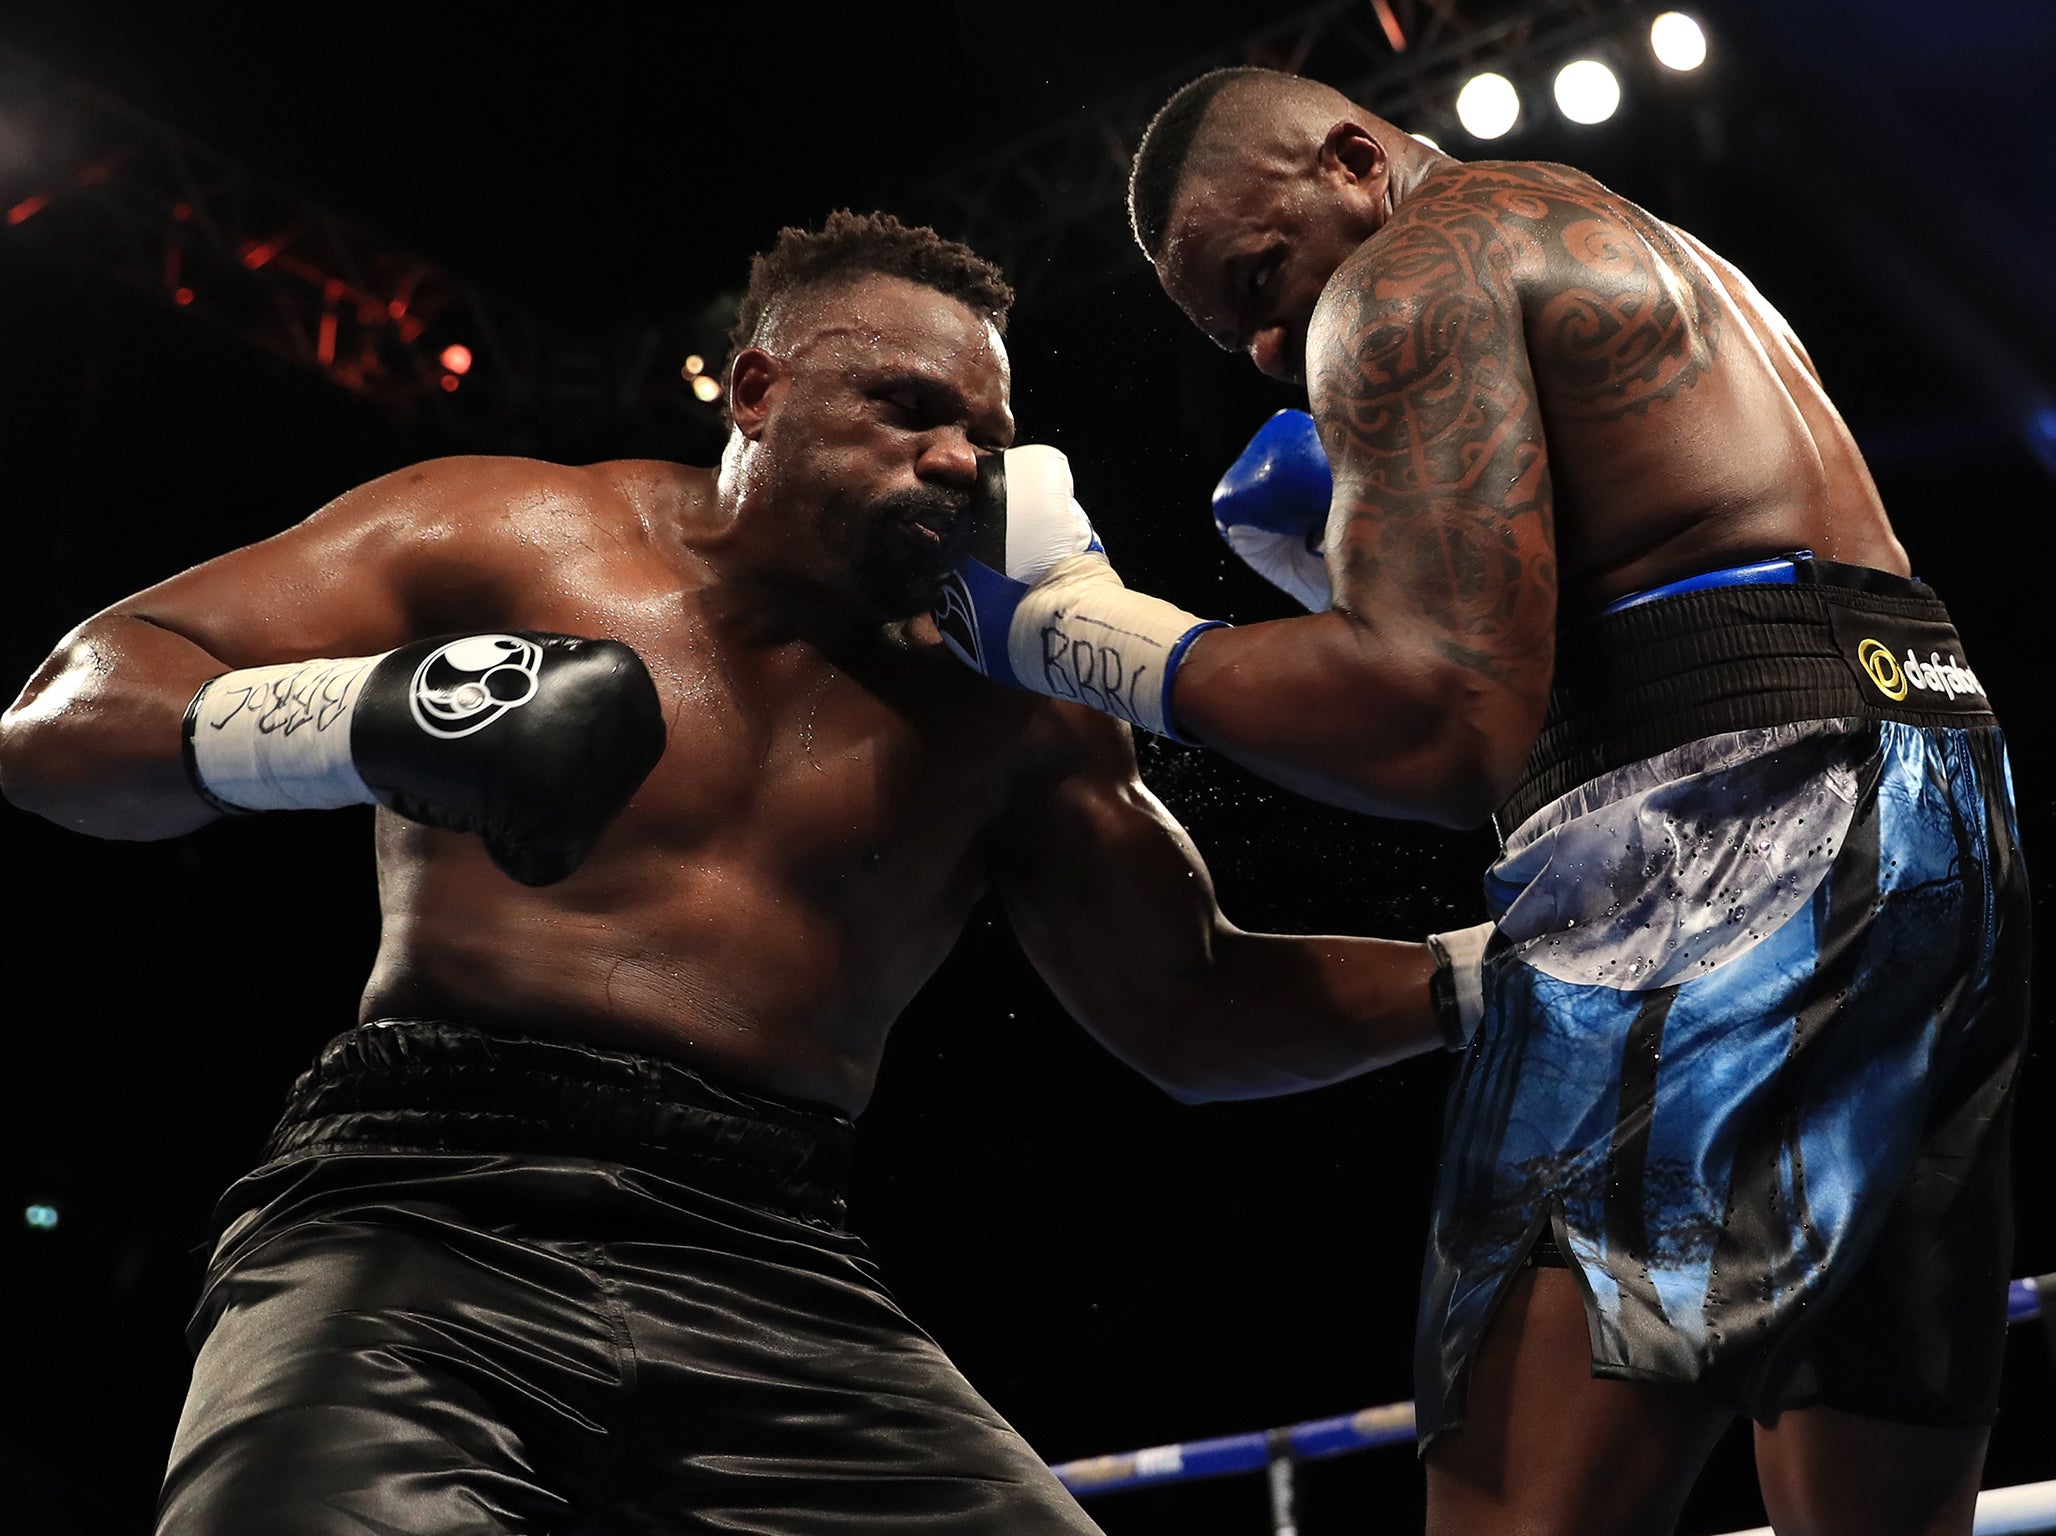 Chisora (L) will be hoping to bounce back from his loss to Whyte